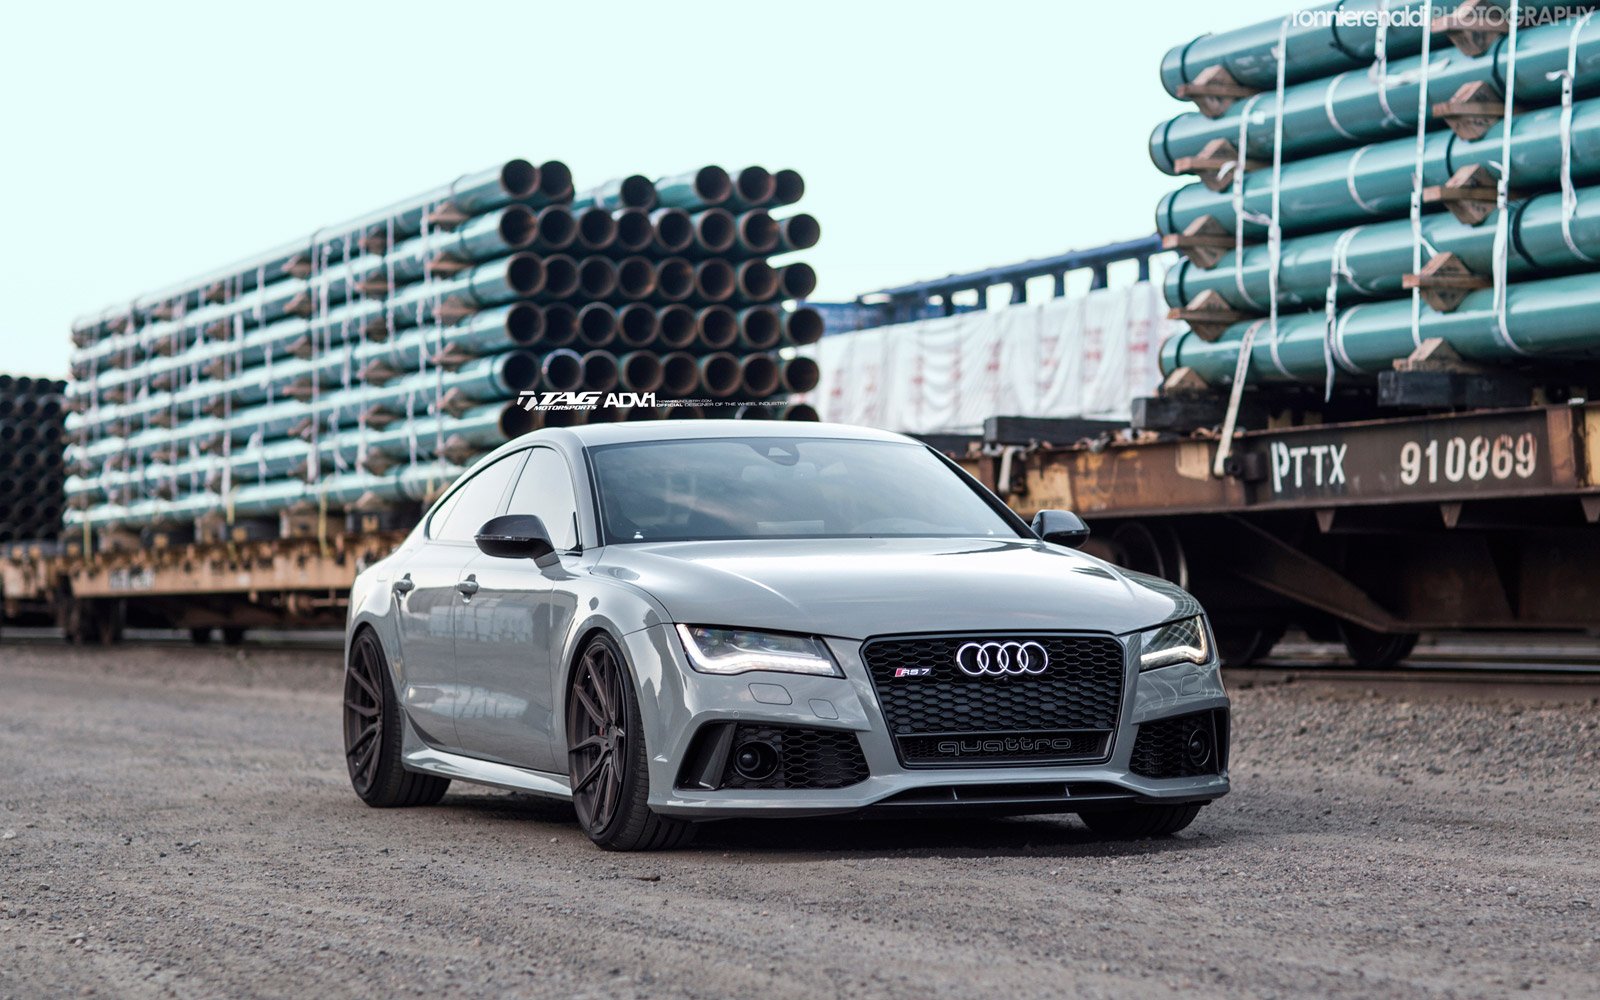 Adv 1 Wheels Audi Rs7 Cars Tuning Wallpapers Hd Desktop And Mobile Backgrounds